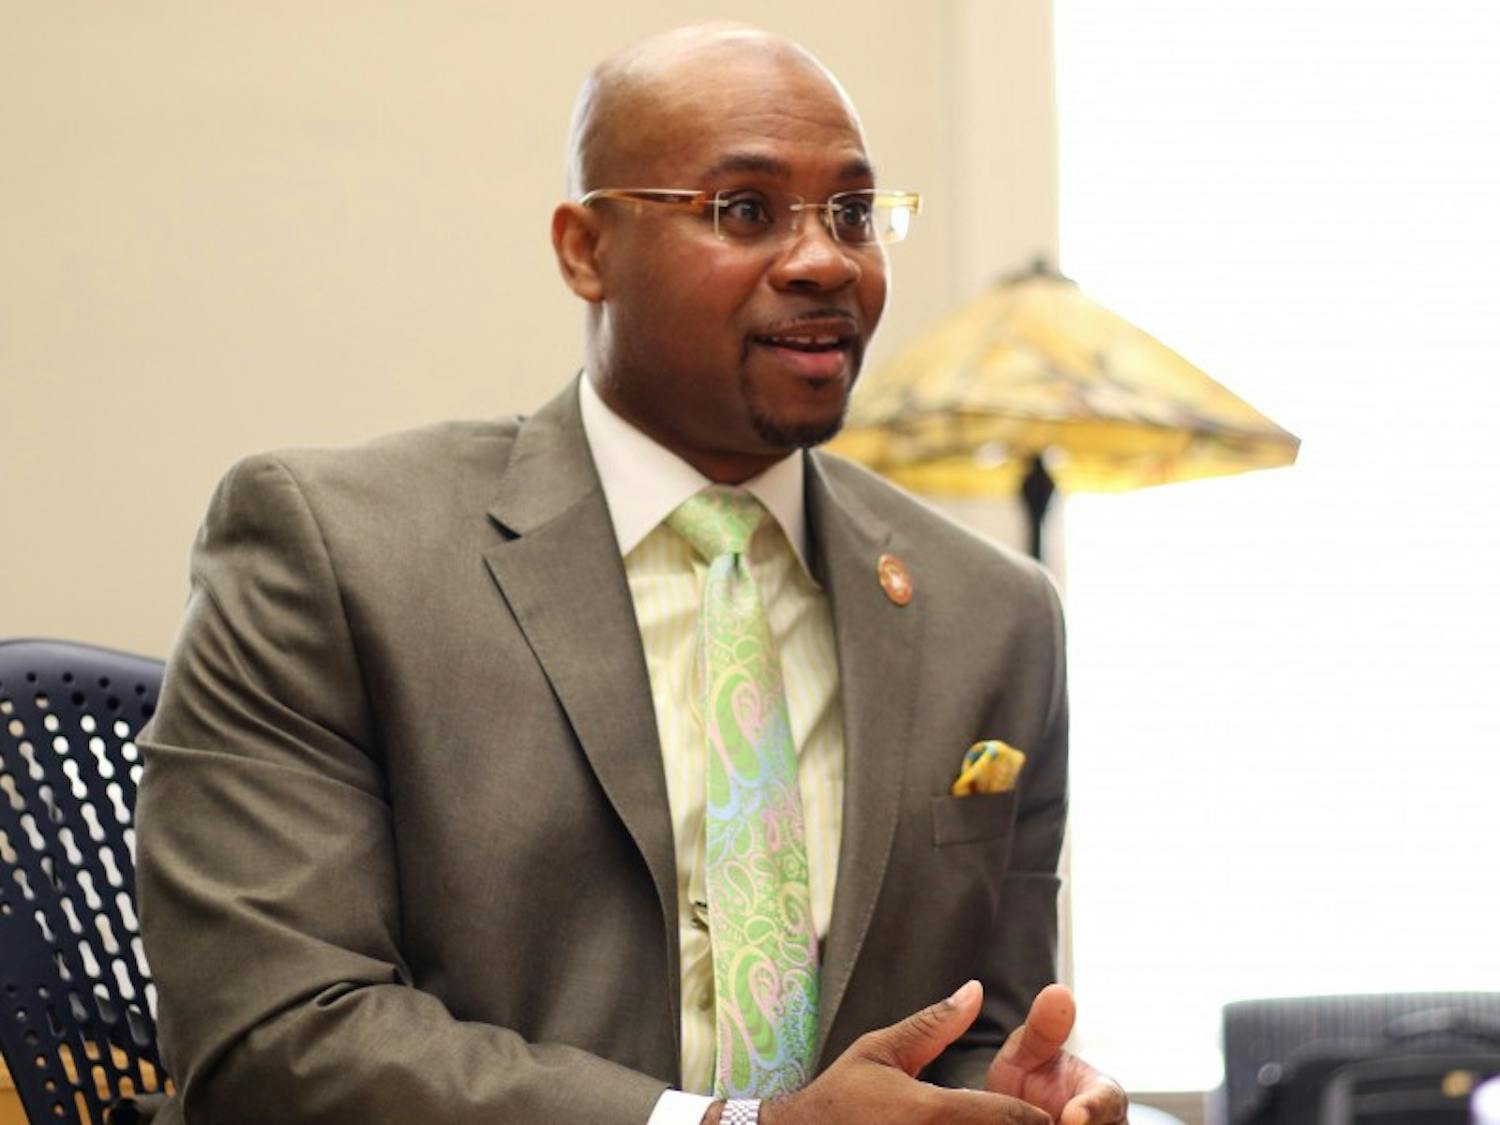 Chief Diversity Officer Patrick Sims spoke about the campus climate survey released to students Monday.